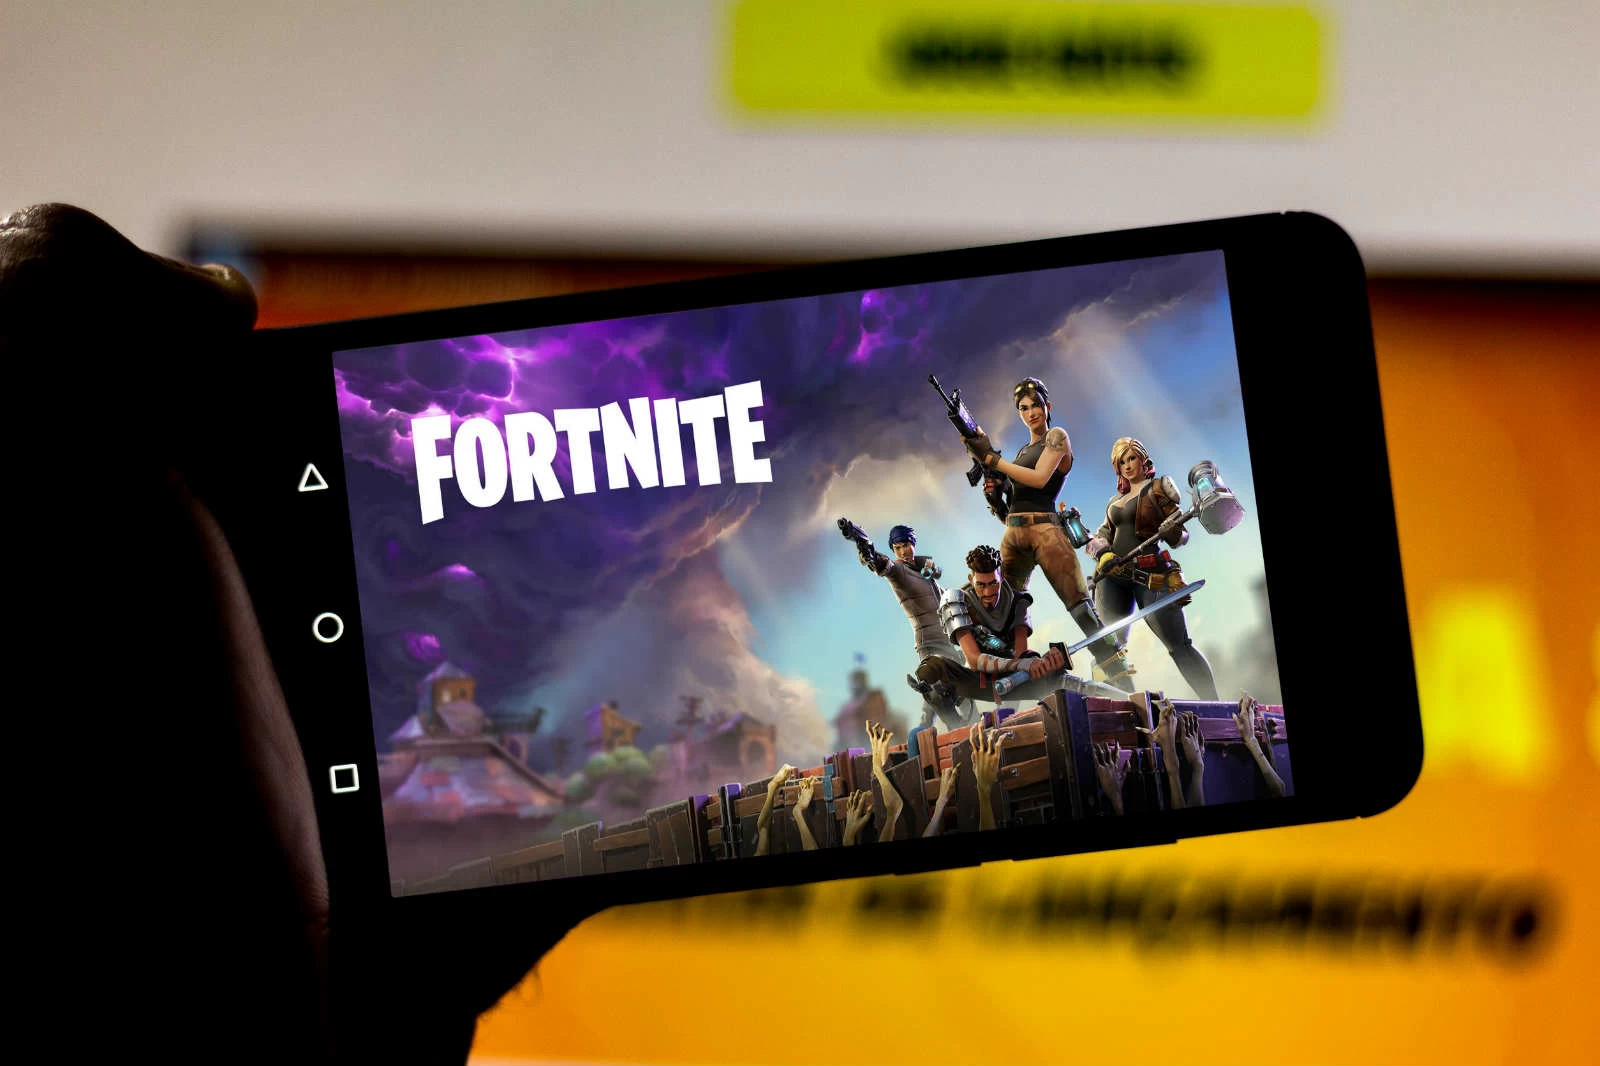 How To Download Fortnite On Phone